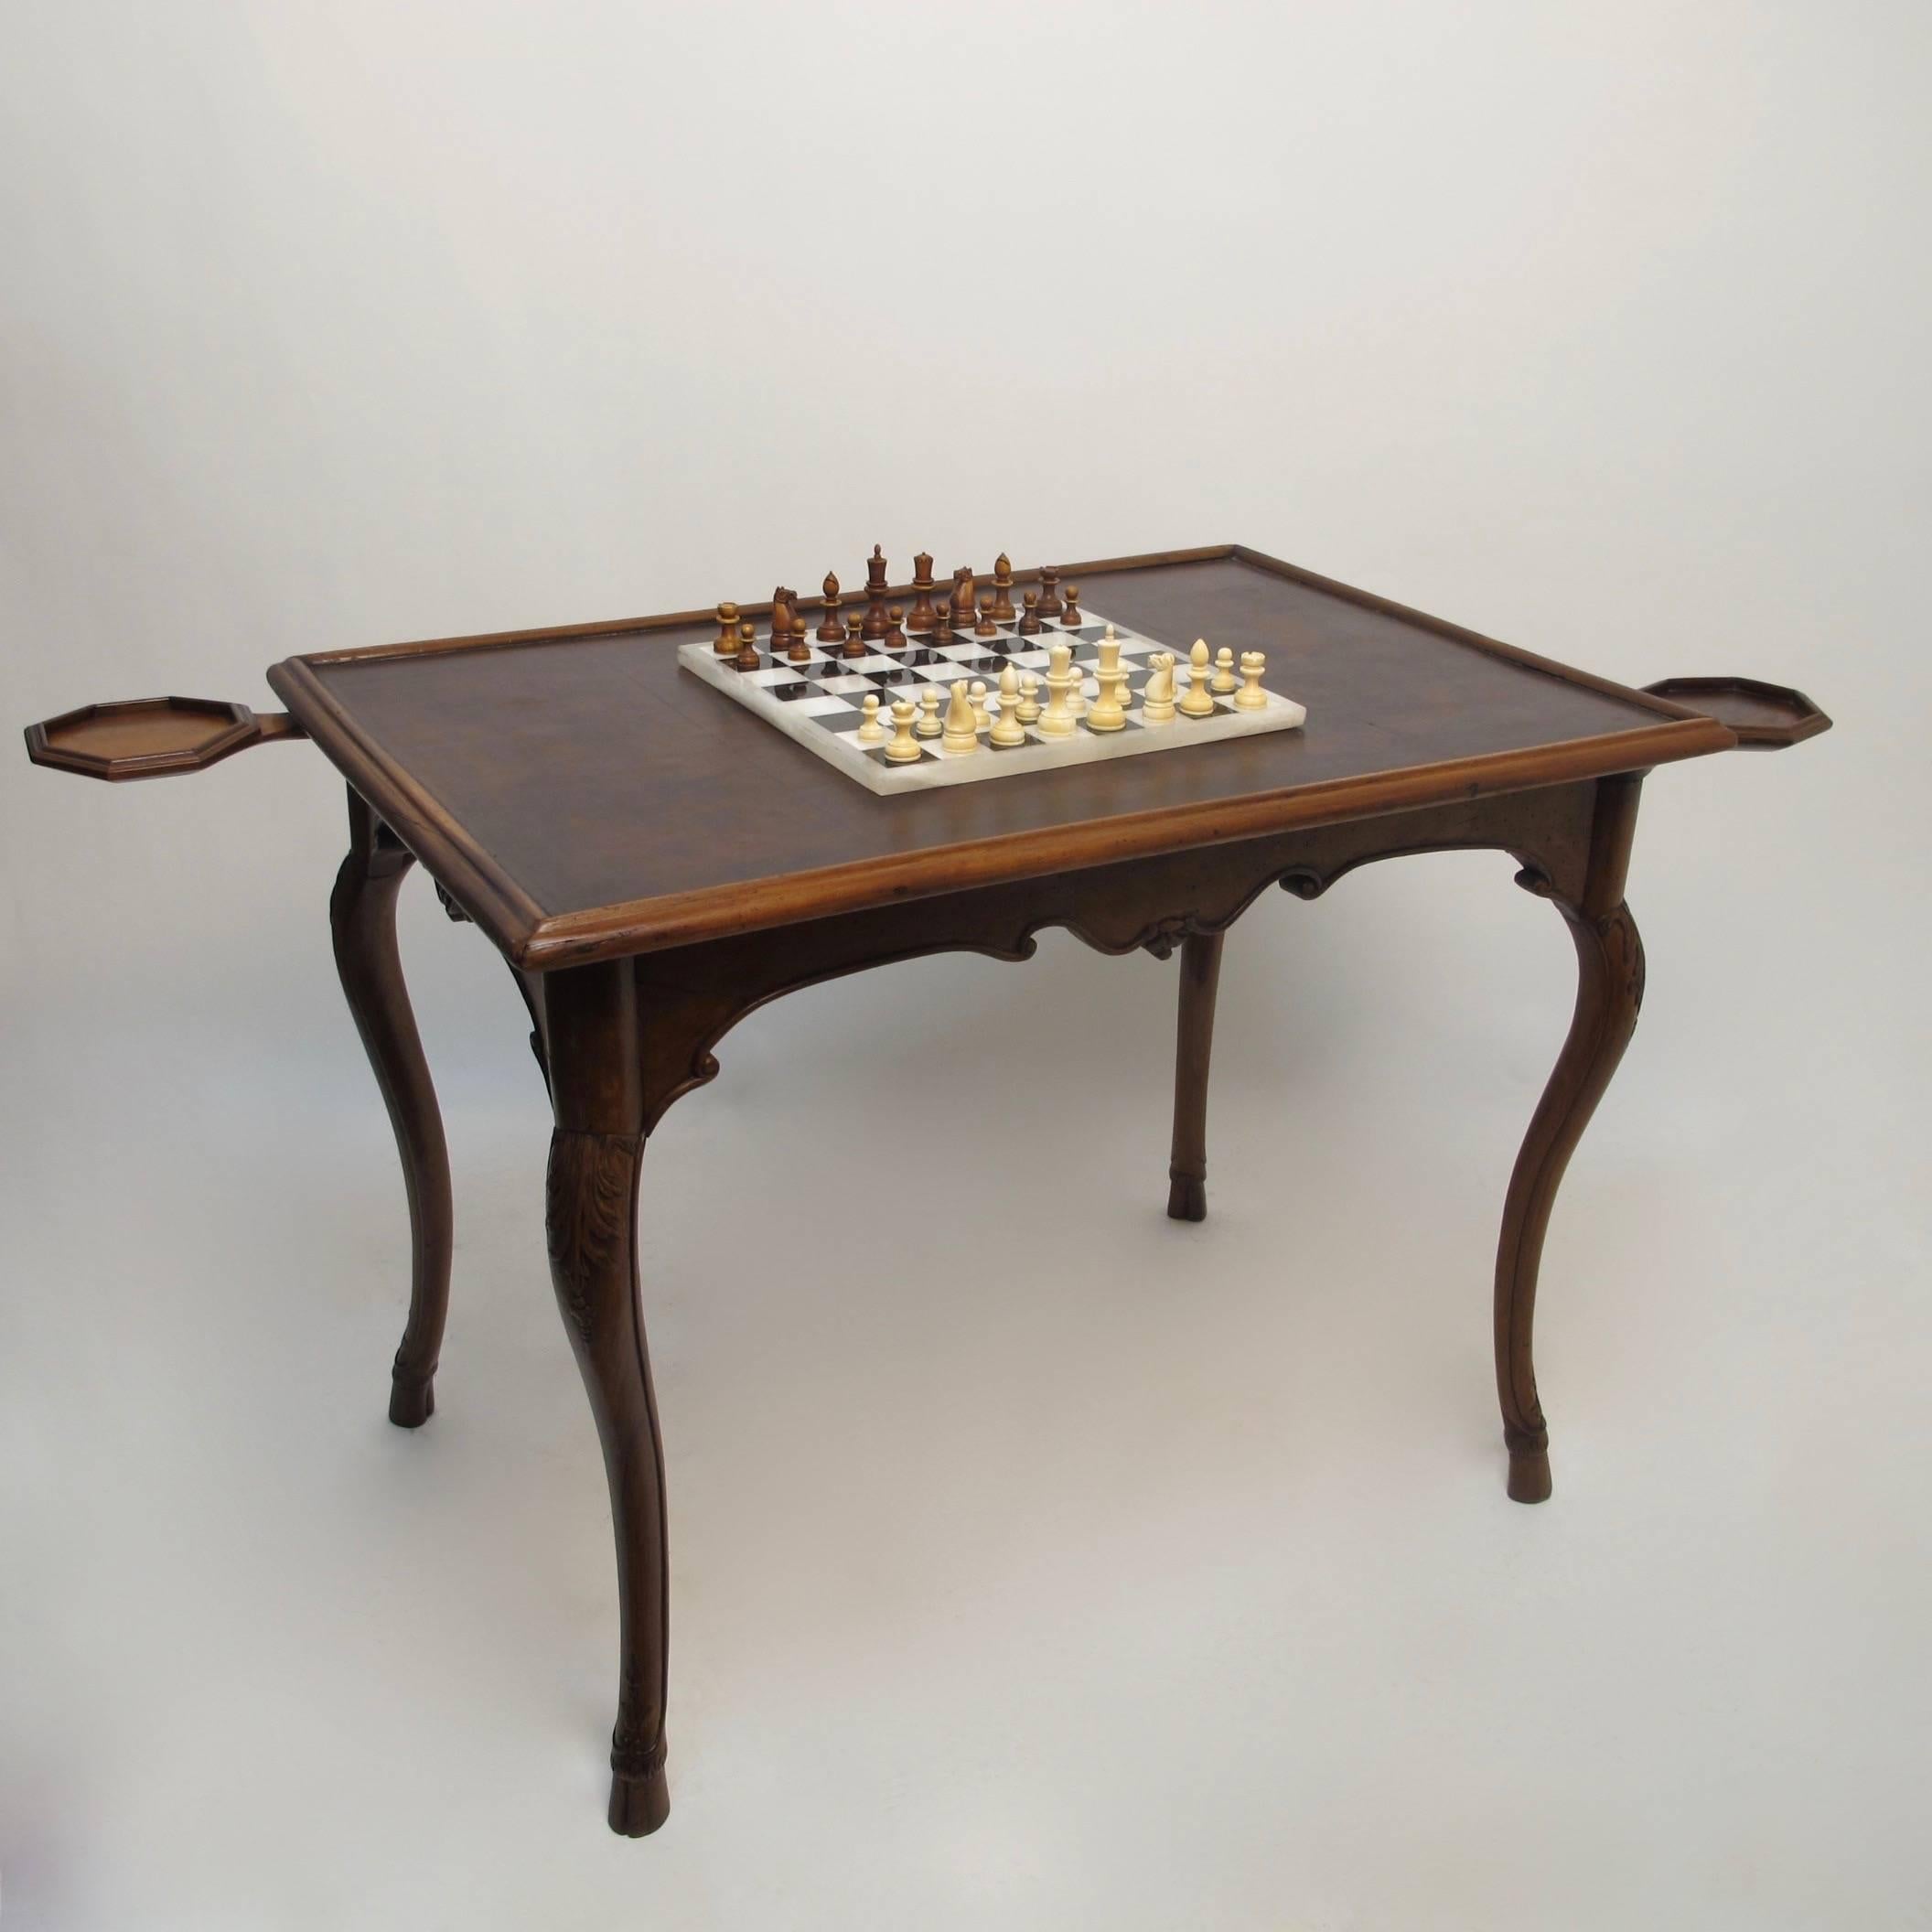 Beautifully carved walnut game table with inset leather top. Having a shapely apron, sitting on cabriole legs with carving at knees and ending with cloven hoof detail. The swing out cup or candle holders were most likely added in the mid-20th